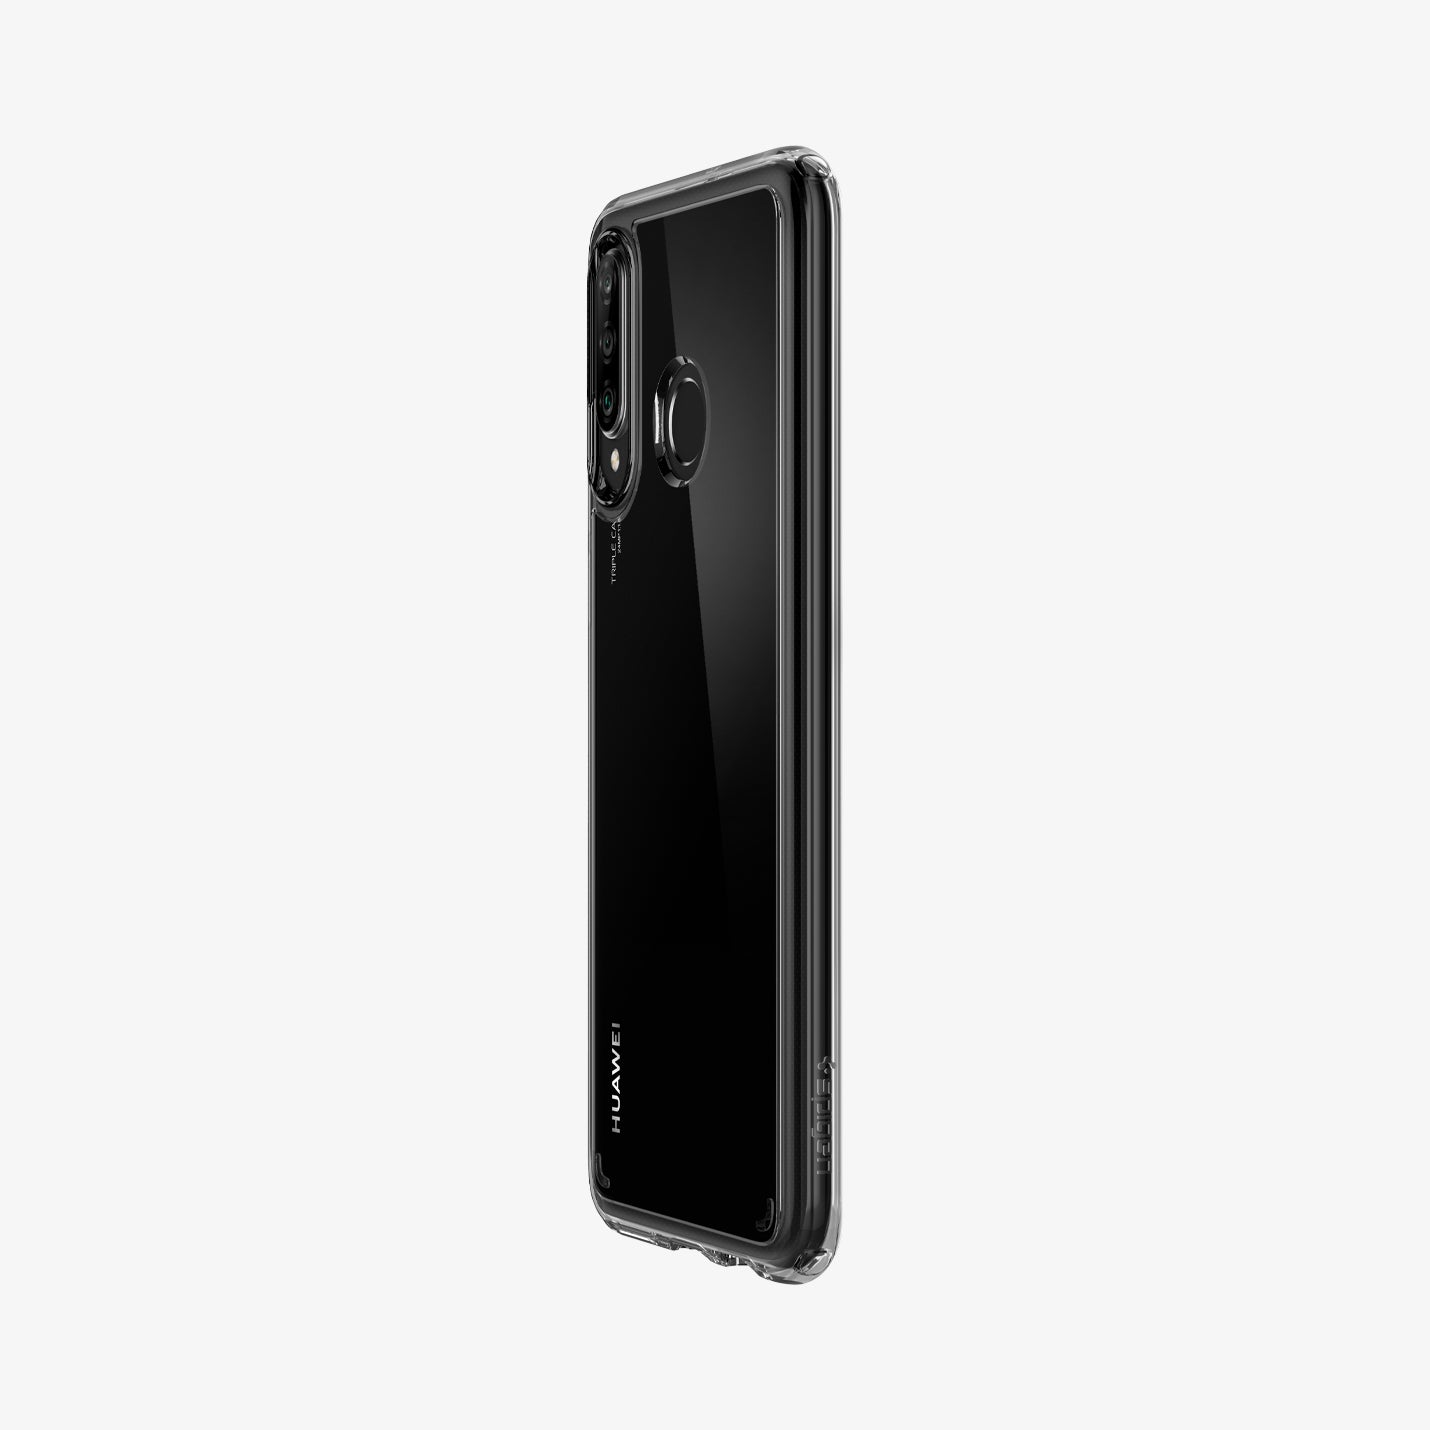 L39CS25741 - Huawei P30 Lite Case Ultra Hybrid in crystal clear showing the back and side